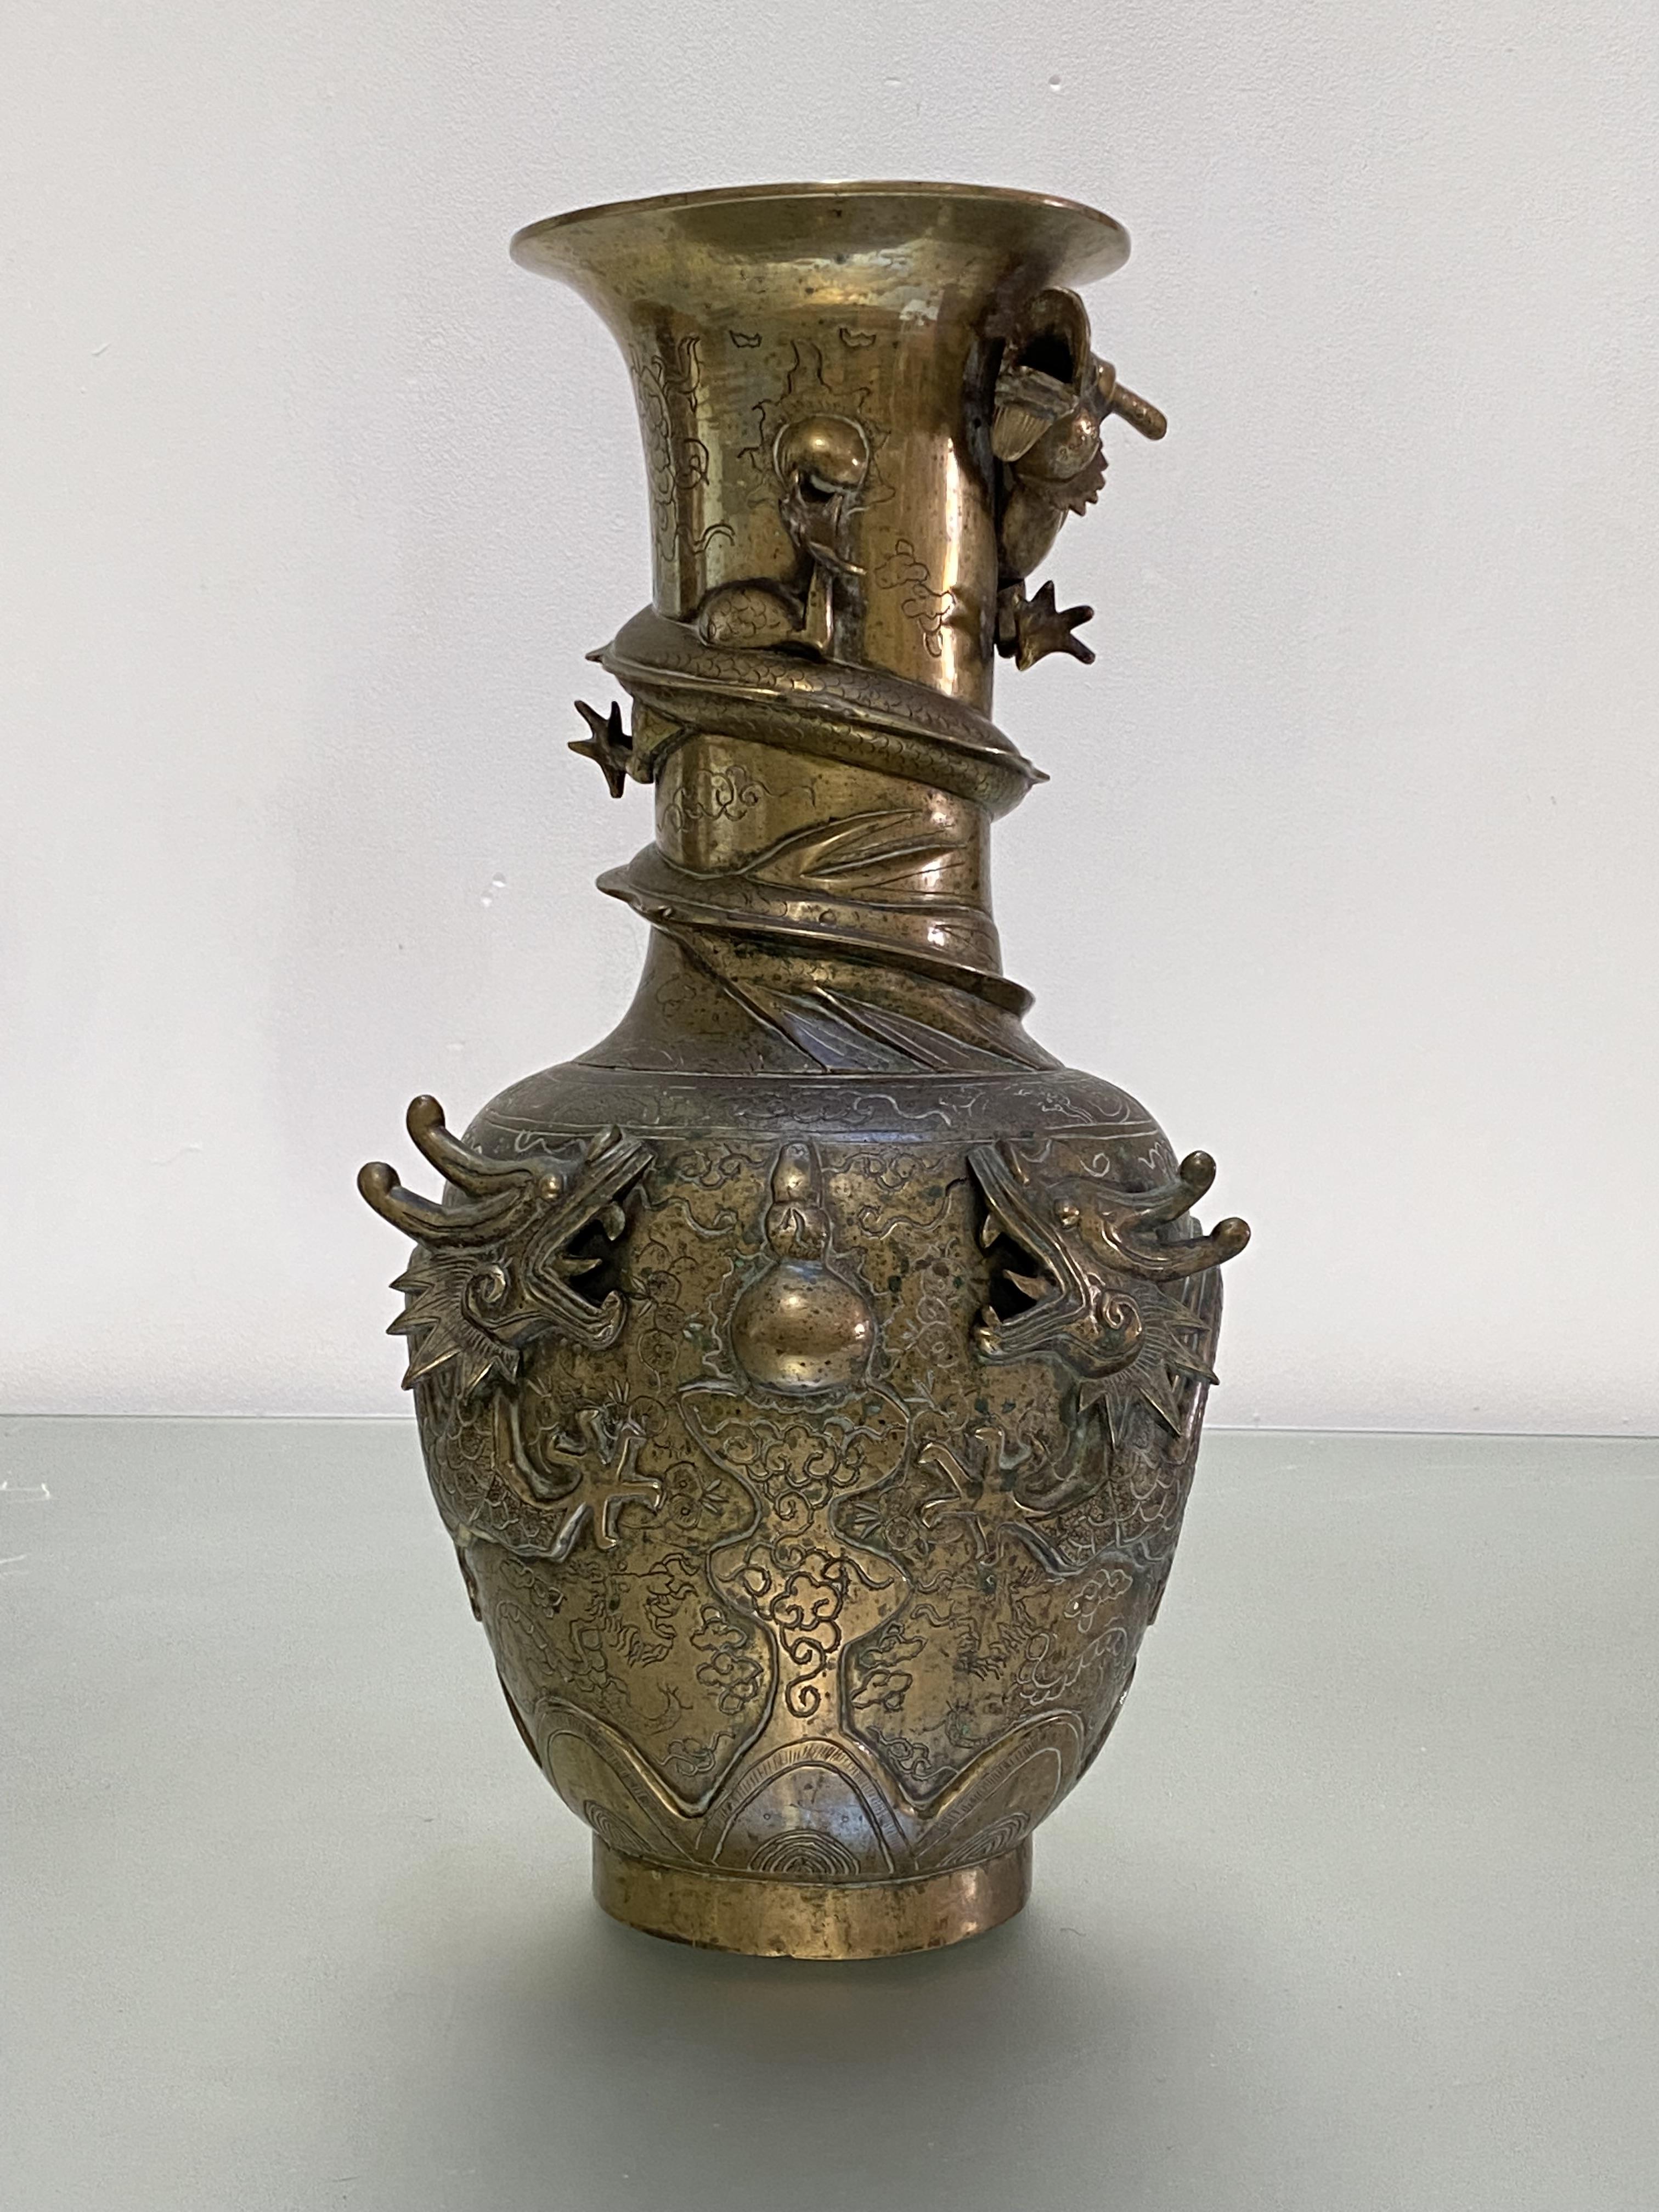 A large Chinese bronze baluster vase, c. 1900, cast in high relief with dragons and a flaming pearl,